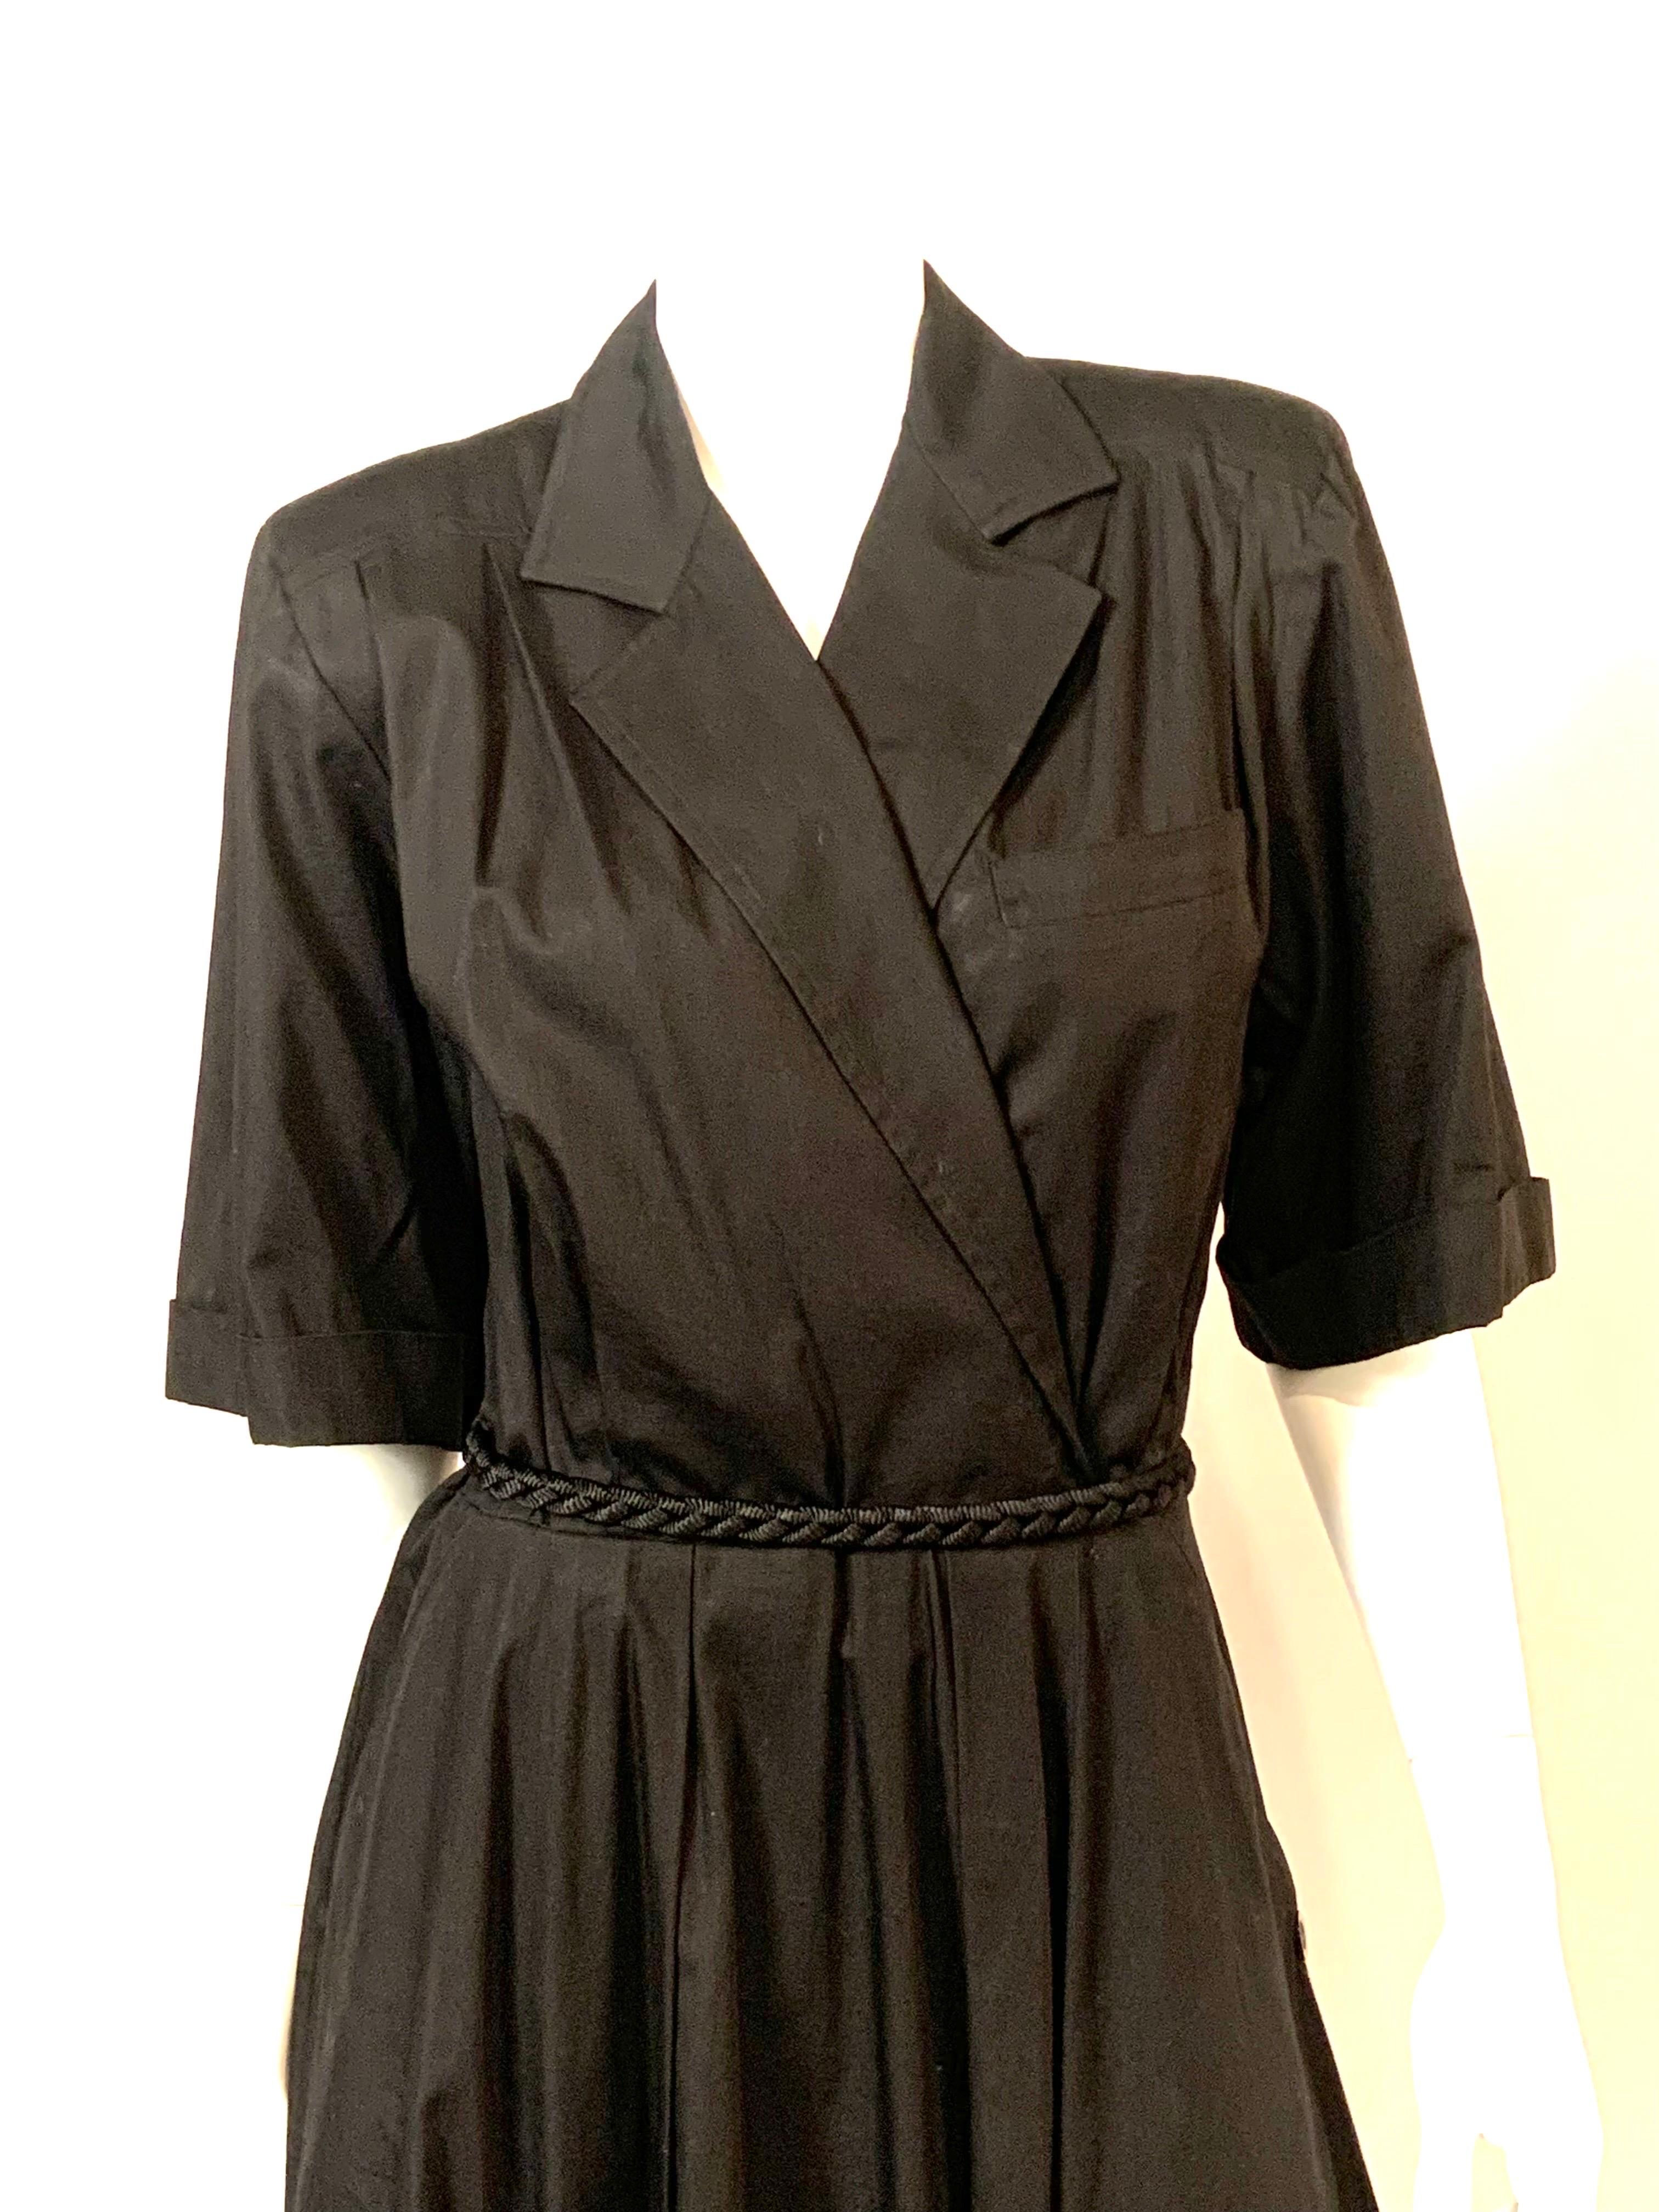 This black cotton dress from Ferragamo has a notched collar, left side breast pocket, short sleeves and a faux wrap style.  There is a left side zipper, a full skirt with two hip pockets and buttons on the left side from the hip pockets to the hem.